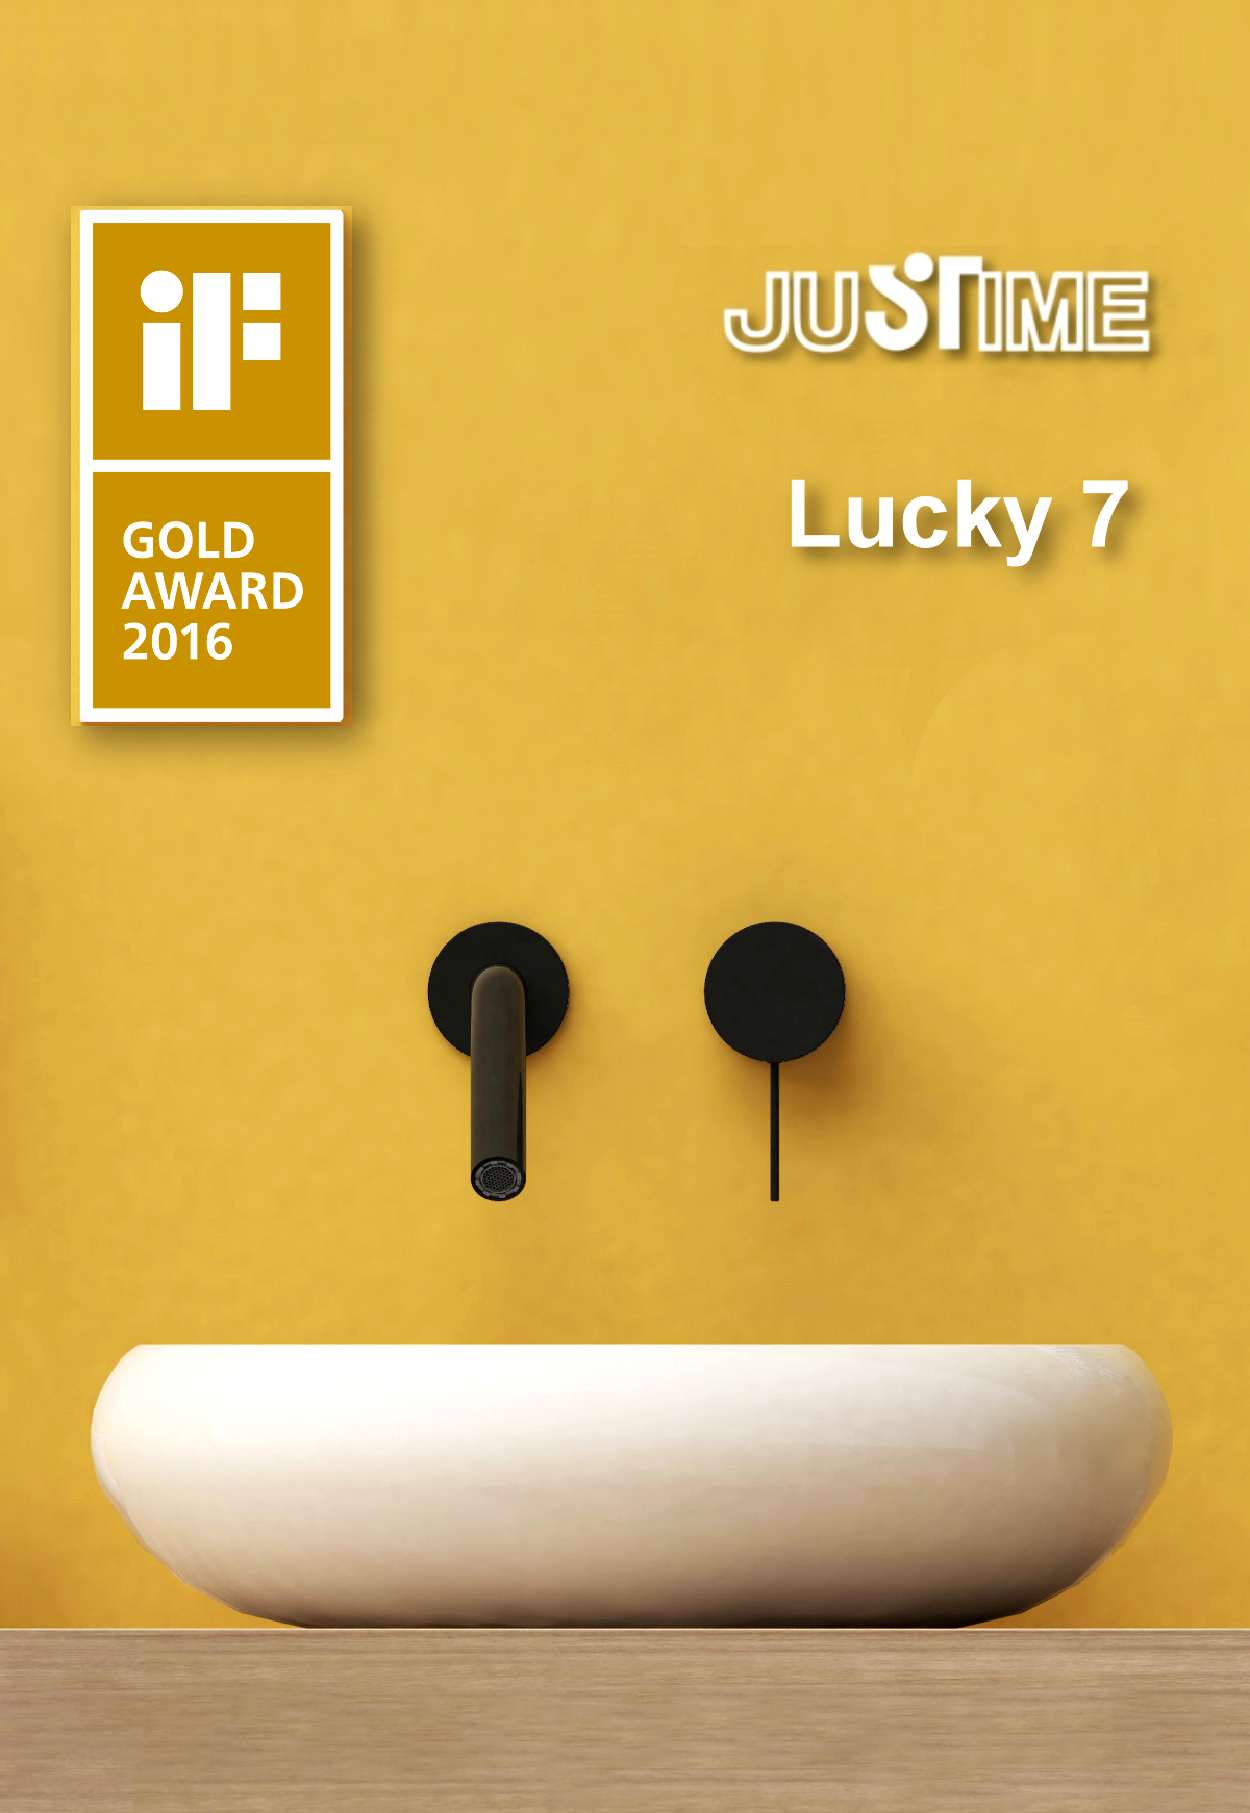 JUSTIME Lucky 7 wall-mounted basin mixer has been announced to receive 2016 iF Gold Award in Munich on Feb. 26th